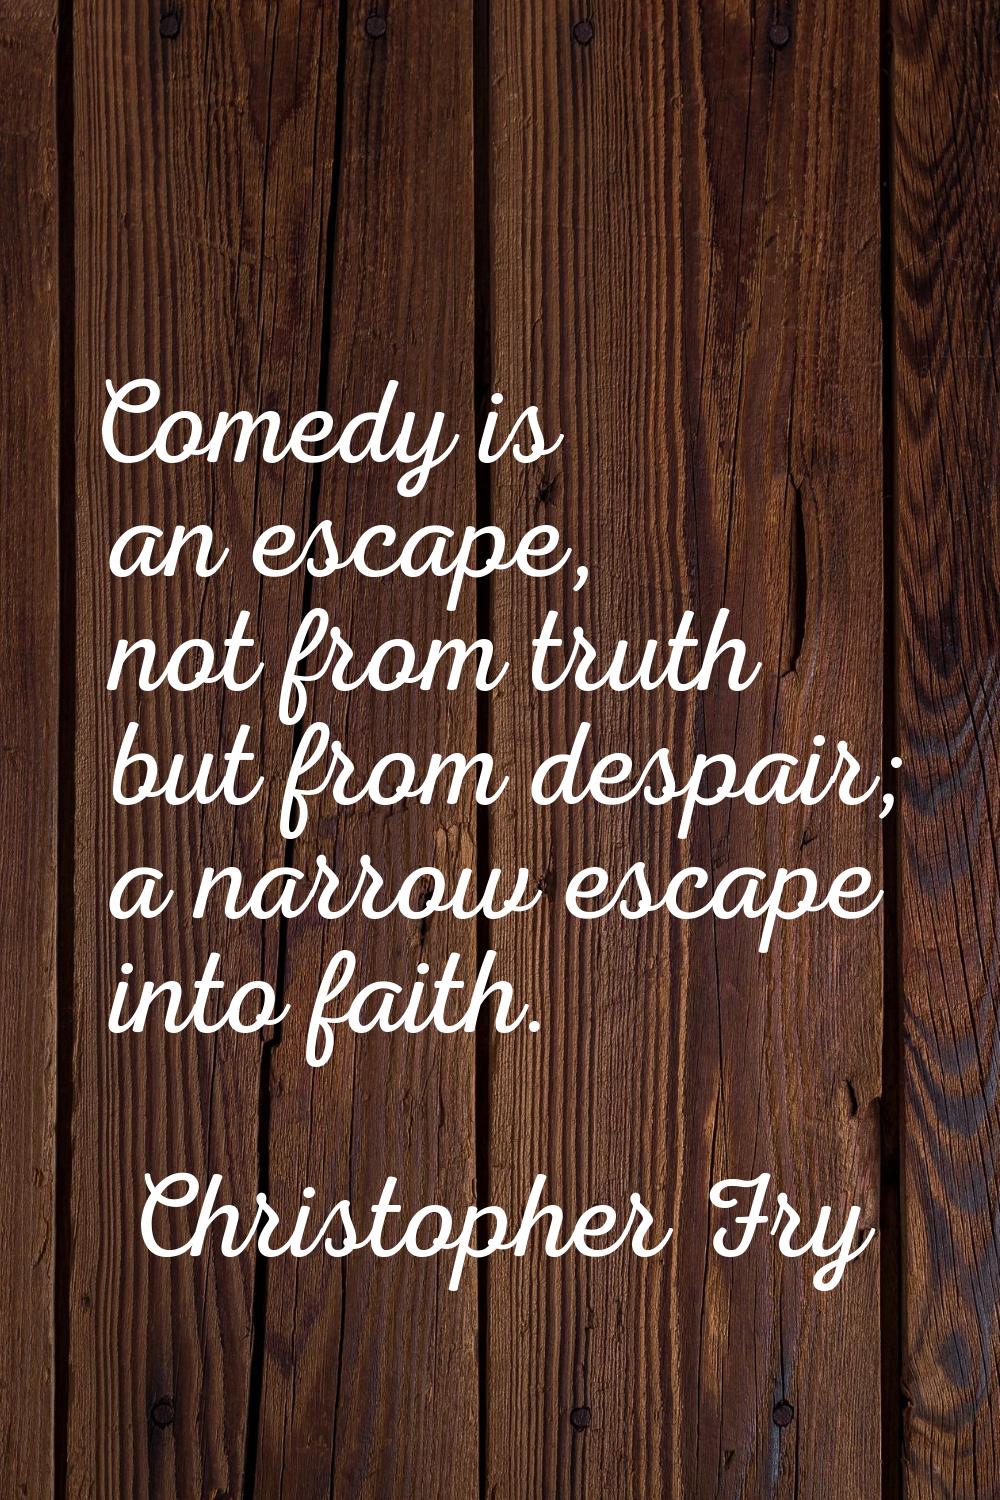 Comedy is an escape, not from truth but from despair; a narrow escape into faith.